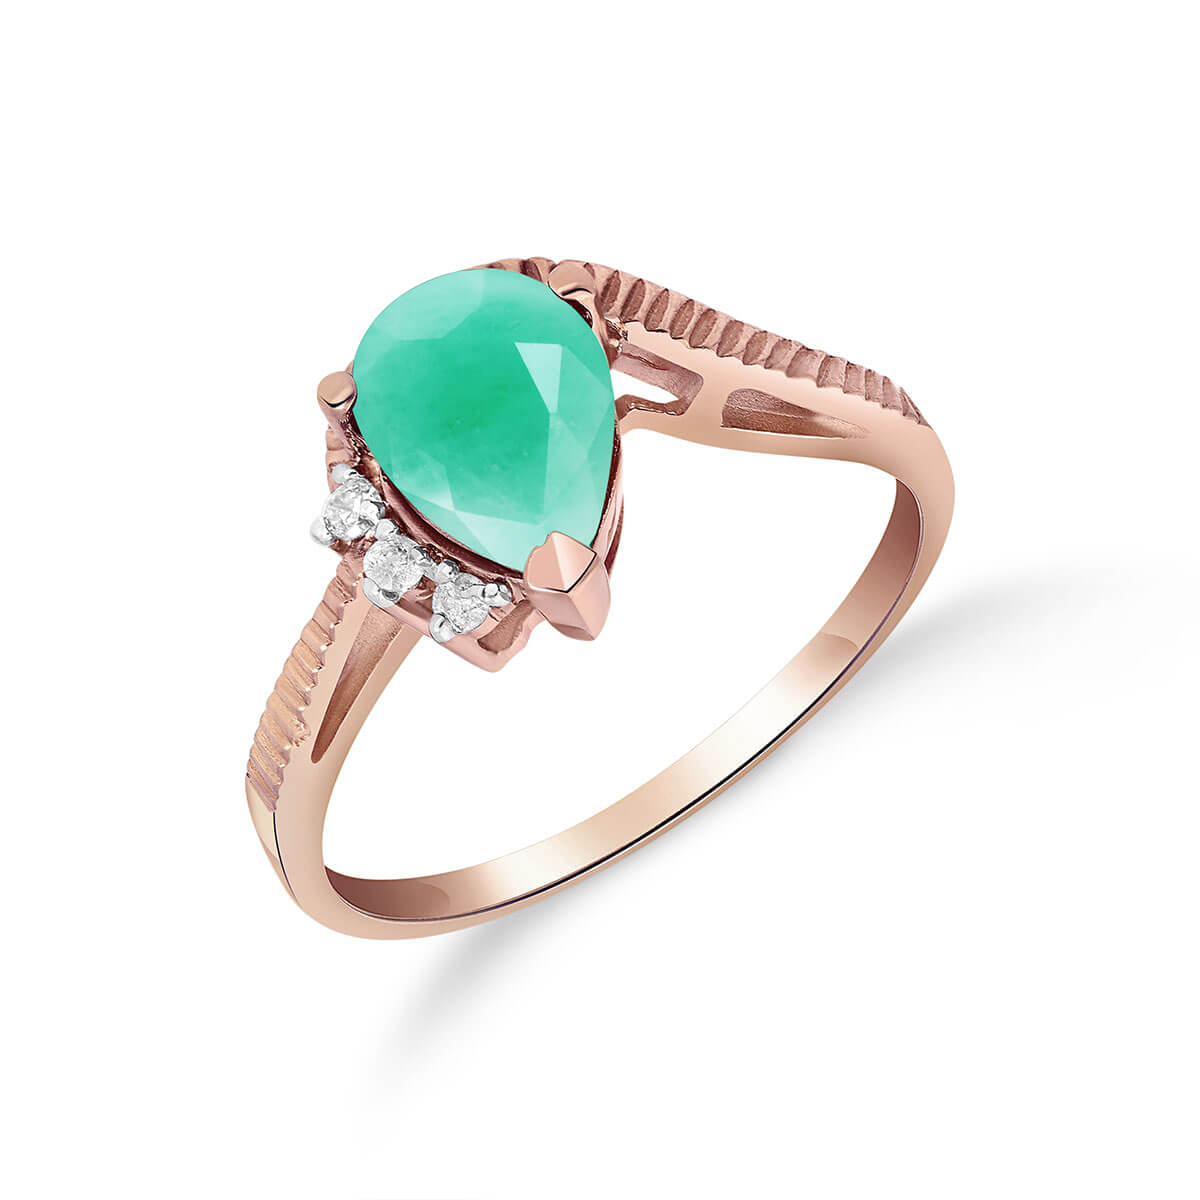 Emerald & Diamond Belle Ring in 9ct Rose Gold